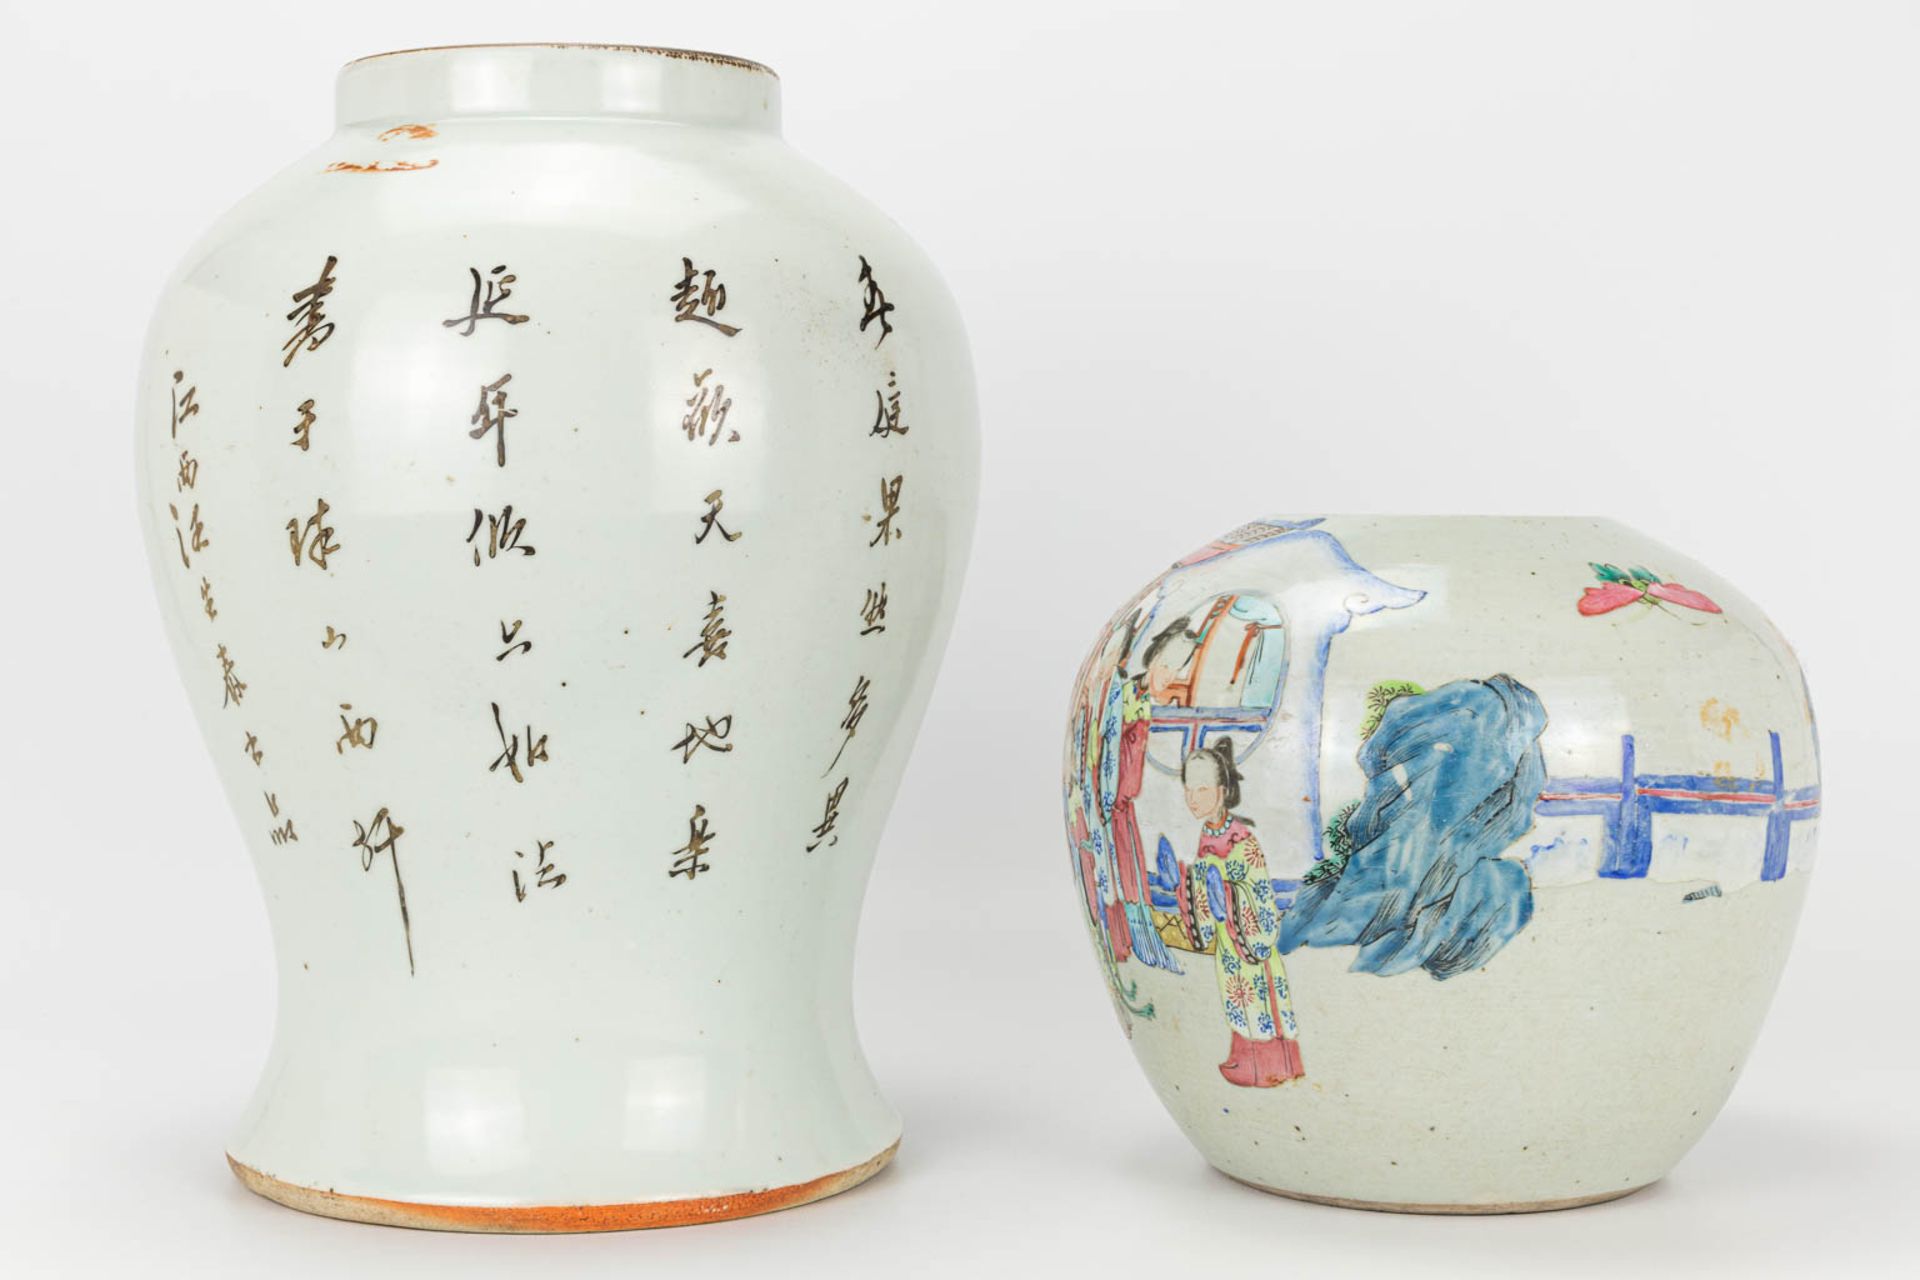 A set of 4 items made of Chinese porcelain. 2 small bowls and 2 ginger jars without lids. - Image 6 of 23